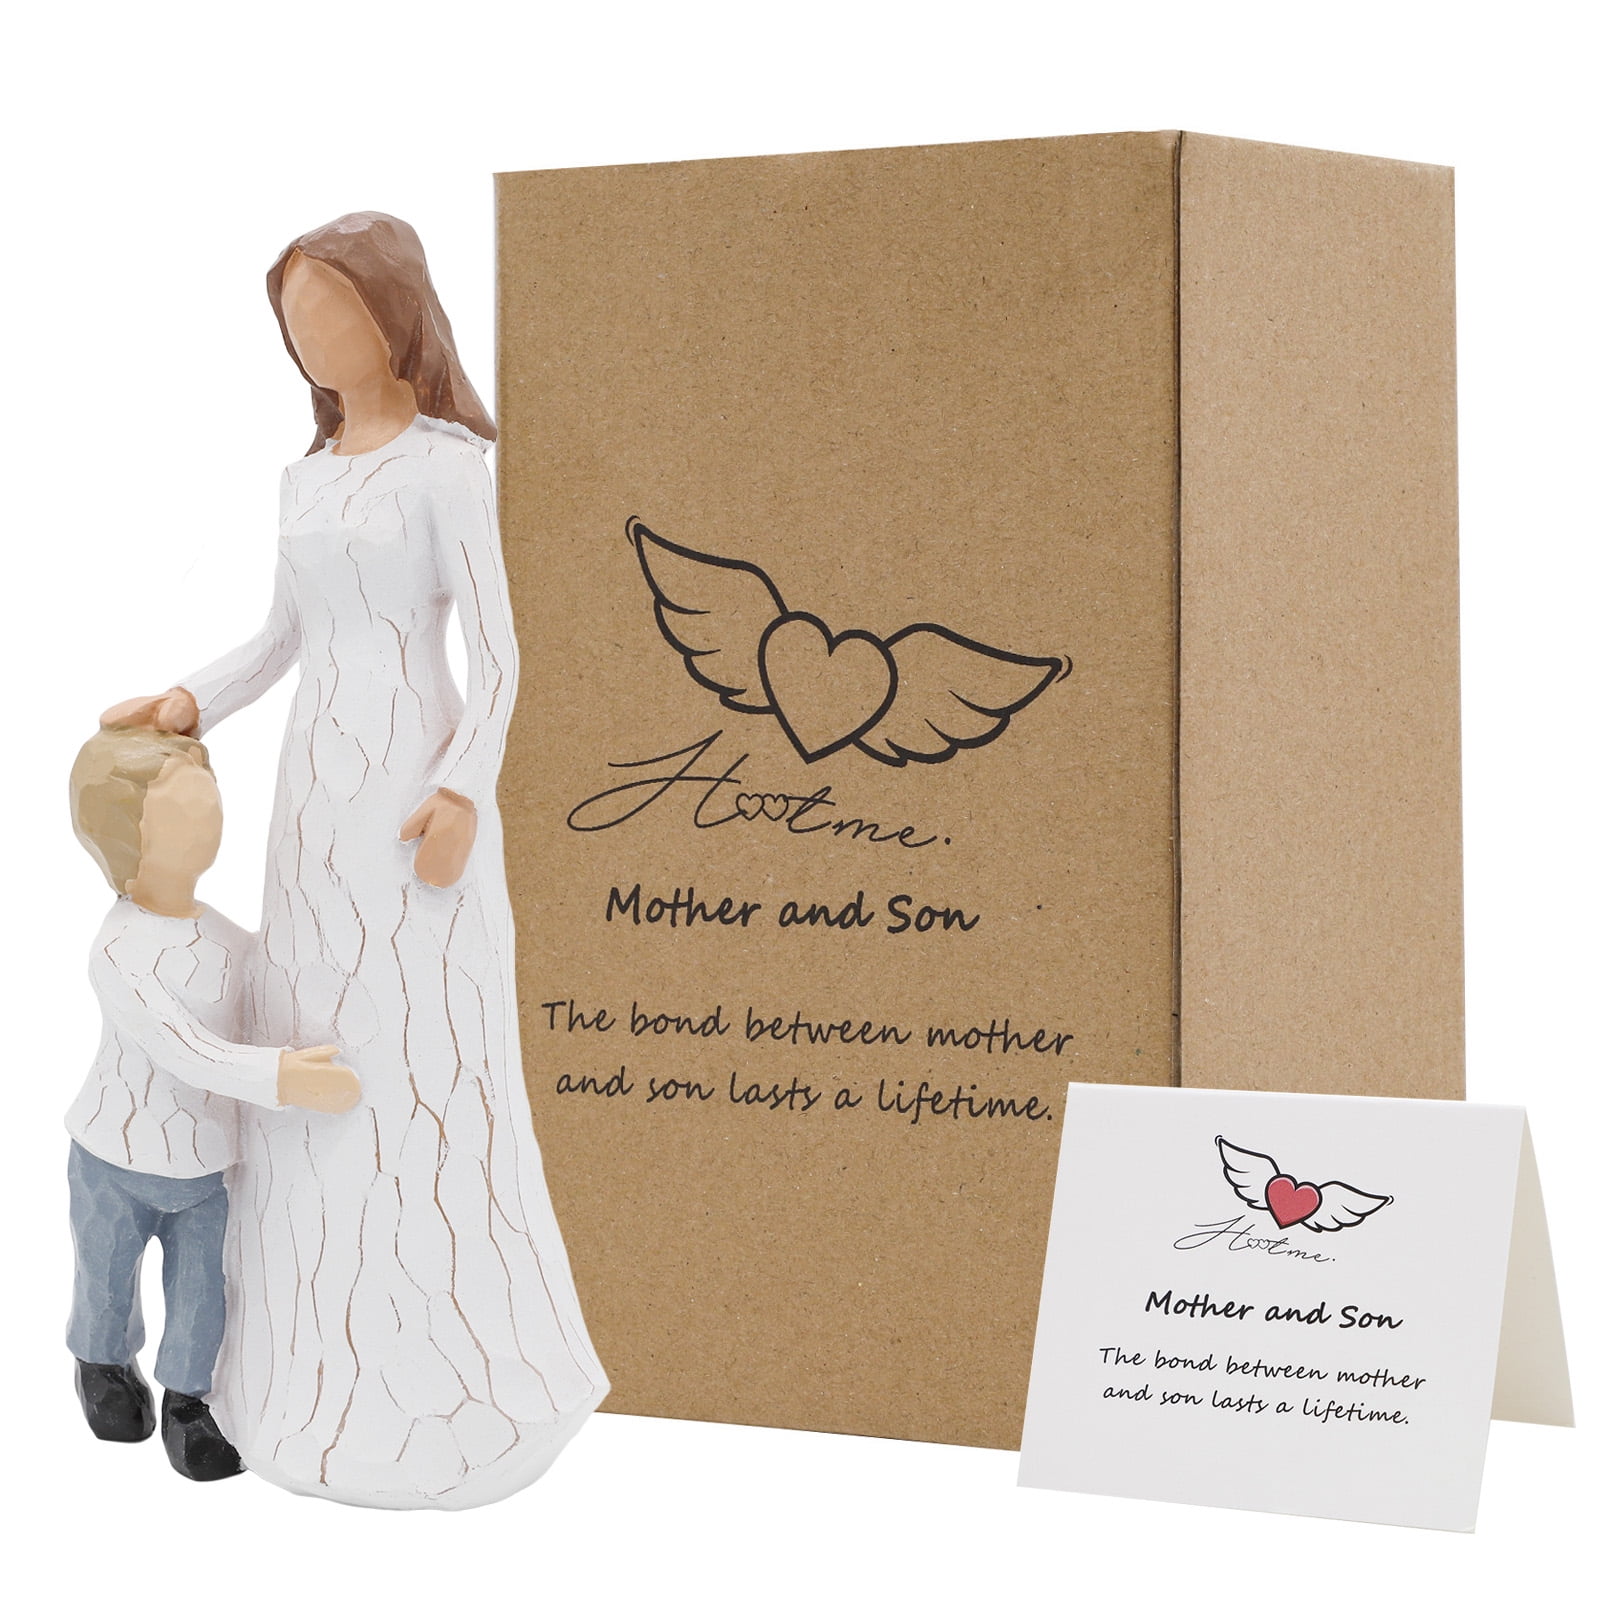 The Greatest Bond Mon and Child Sculptures Multicolor Sculpted Hand-Painted Figures with Gift Card for Anniversary Birthday Mother and Son Figurines Statues